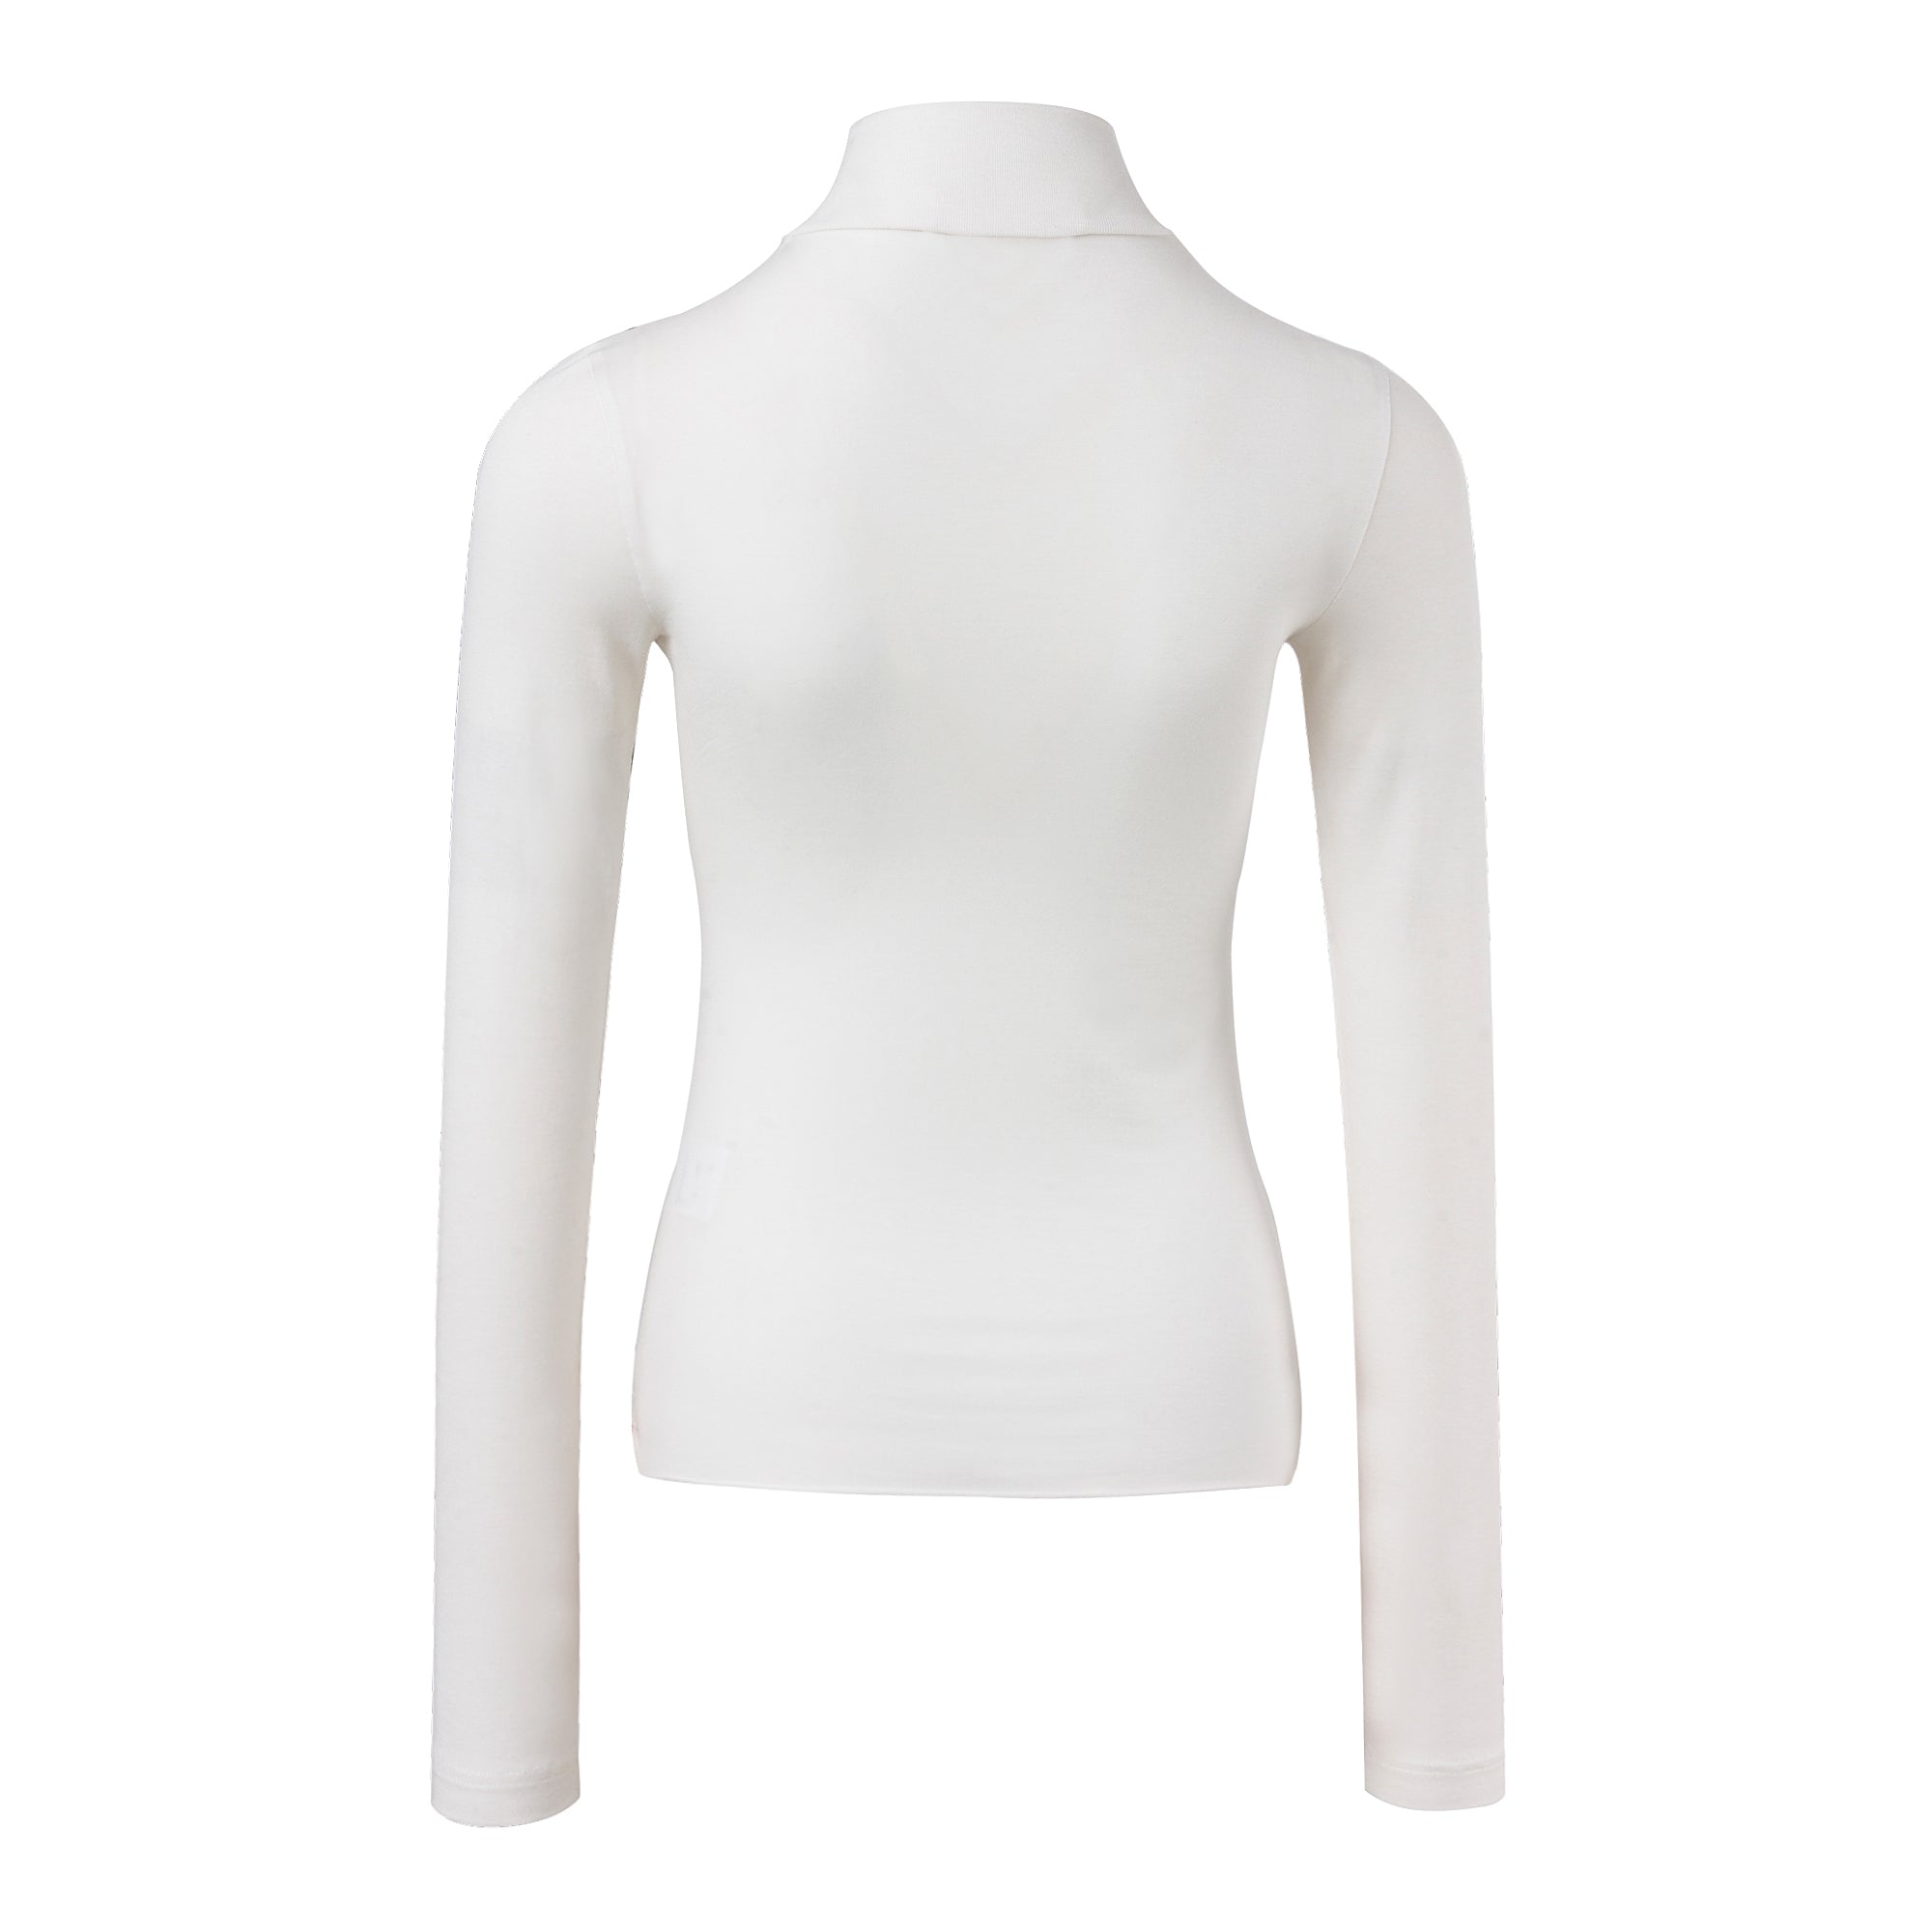 Ther. White Sheer Long-sleeve Top | MADA IN CHINA